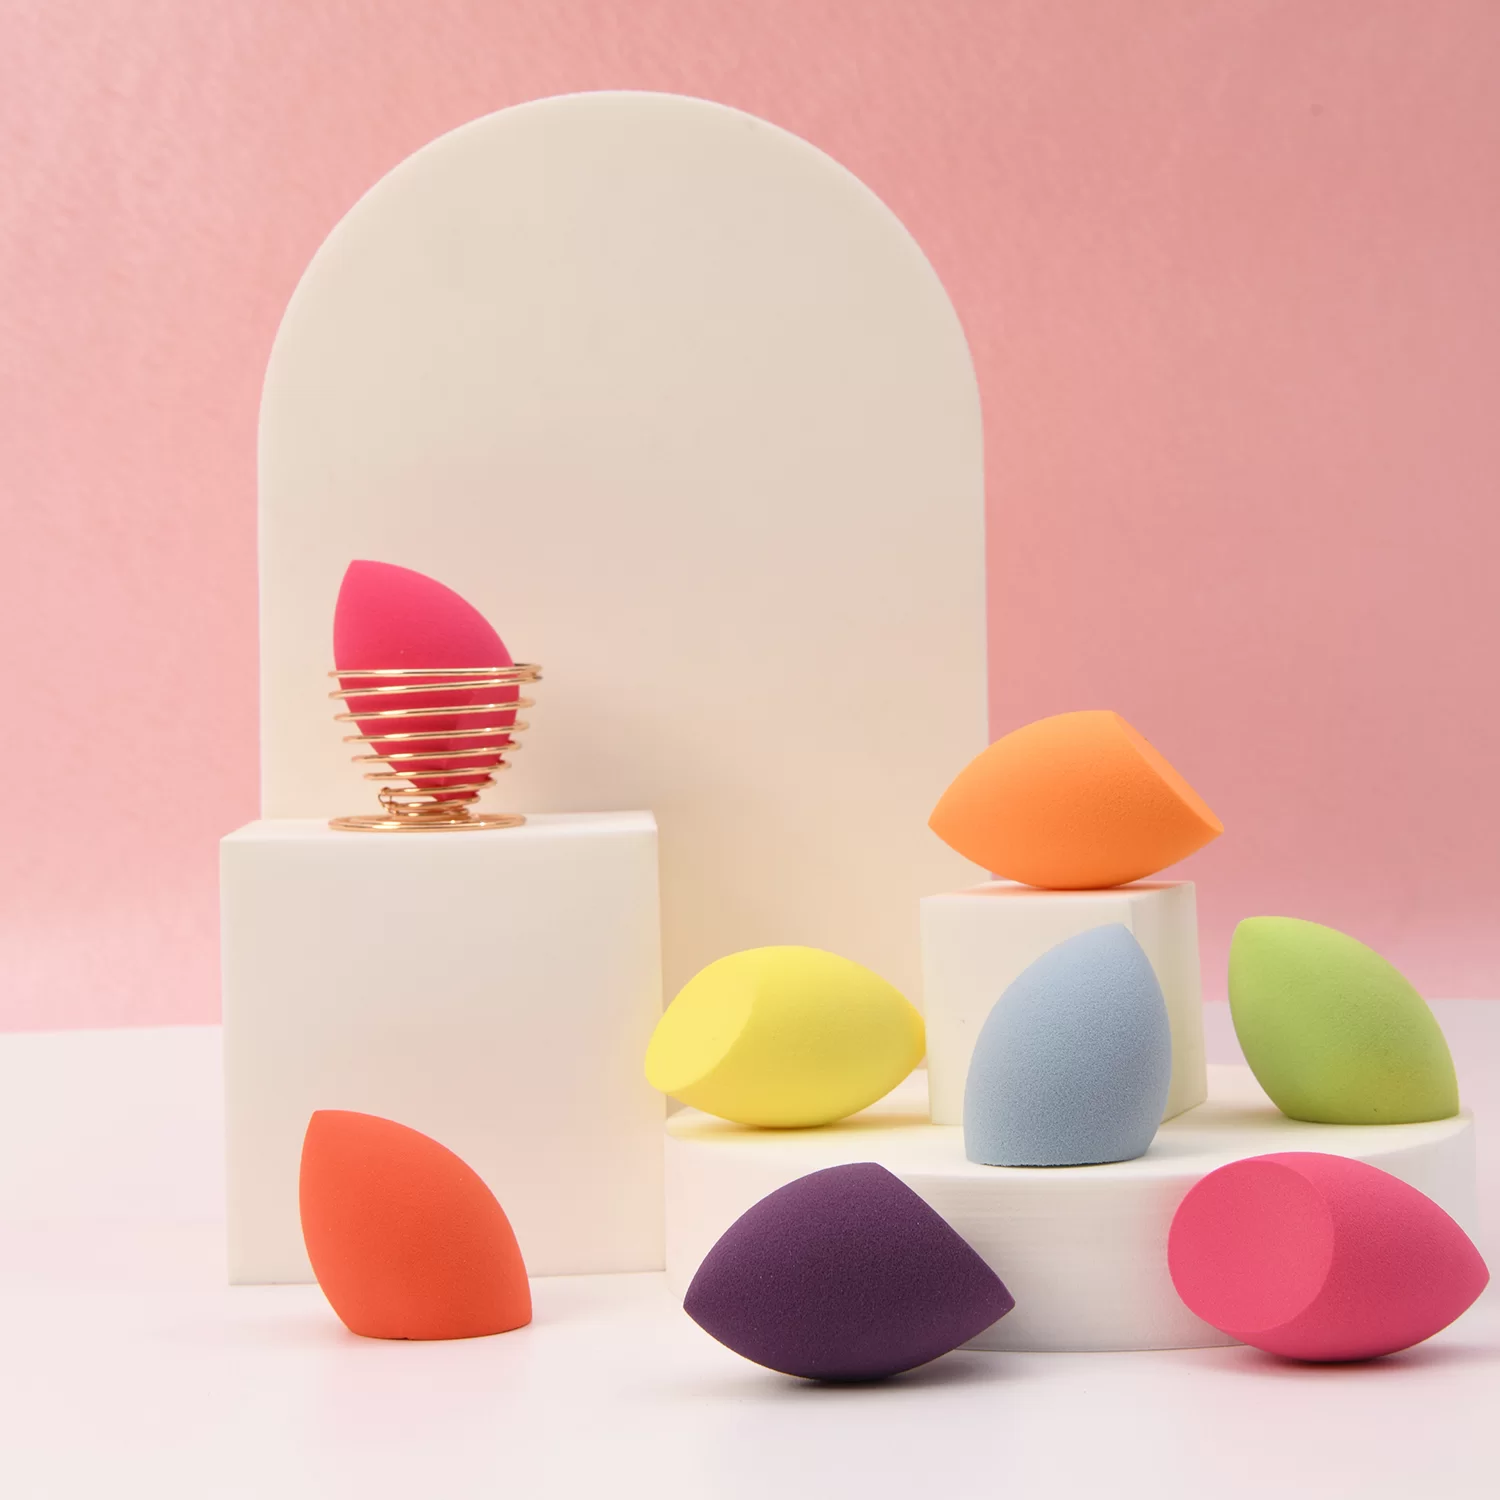 Miracle Complexion Sponge Makeup Blender Multi Tasker Real High Quality Techniques Bevel Shape Latex Free